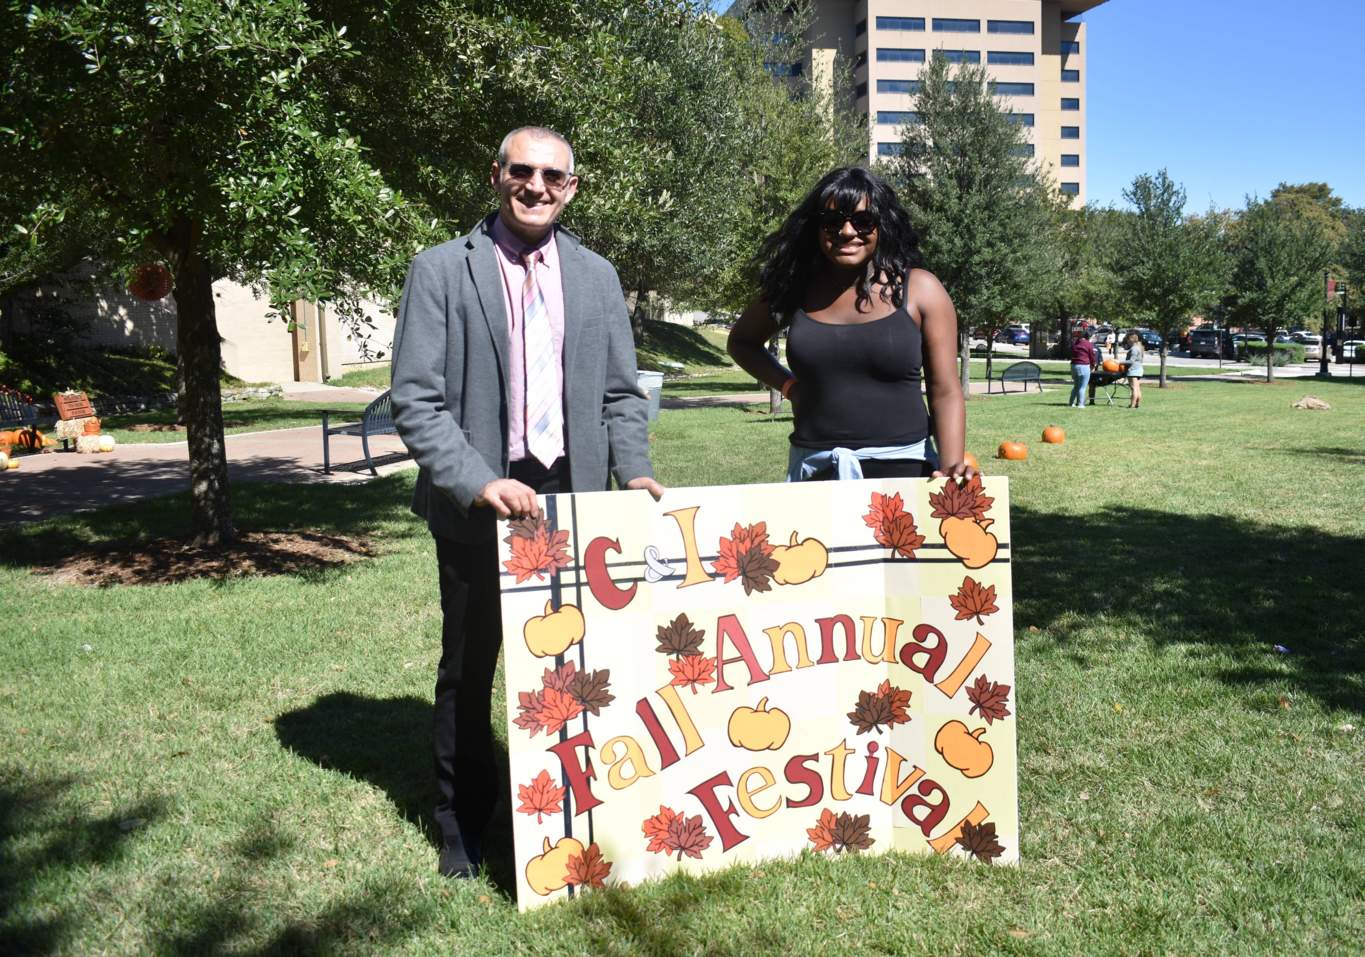 Dr. Polat and Kei holding an Annual Fall Festival sign